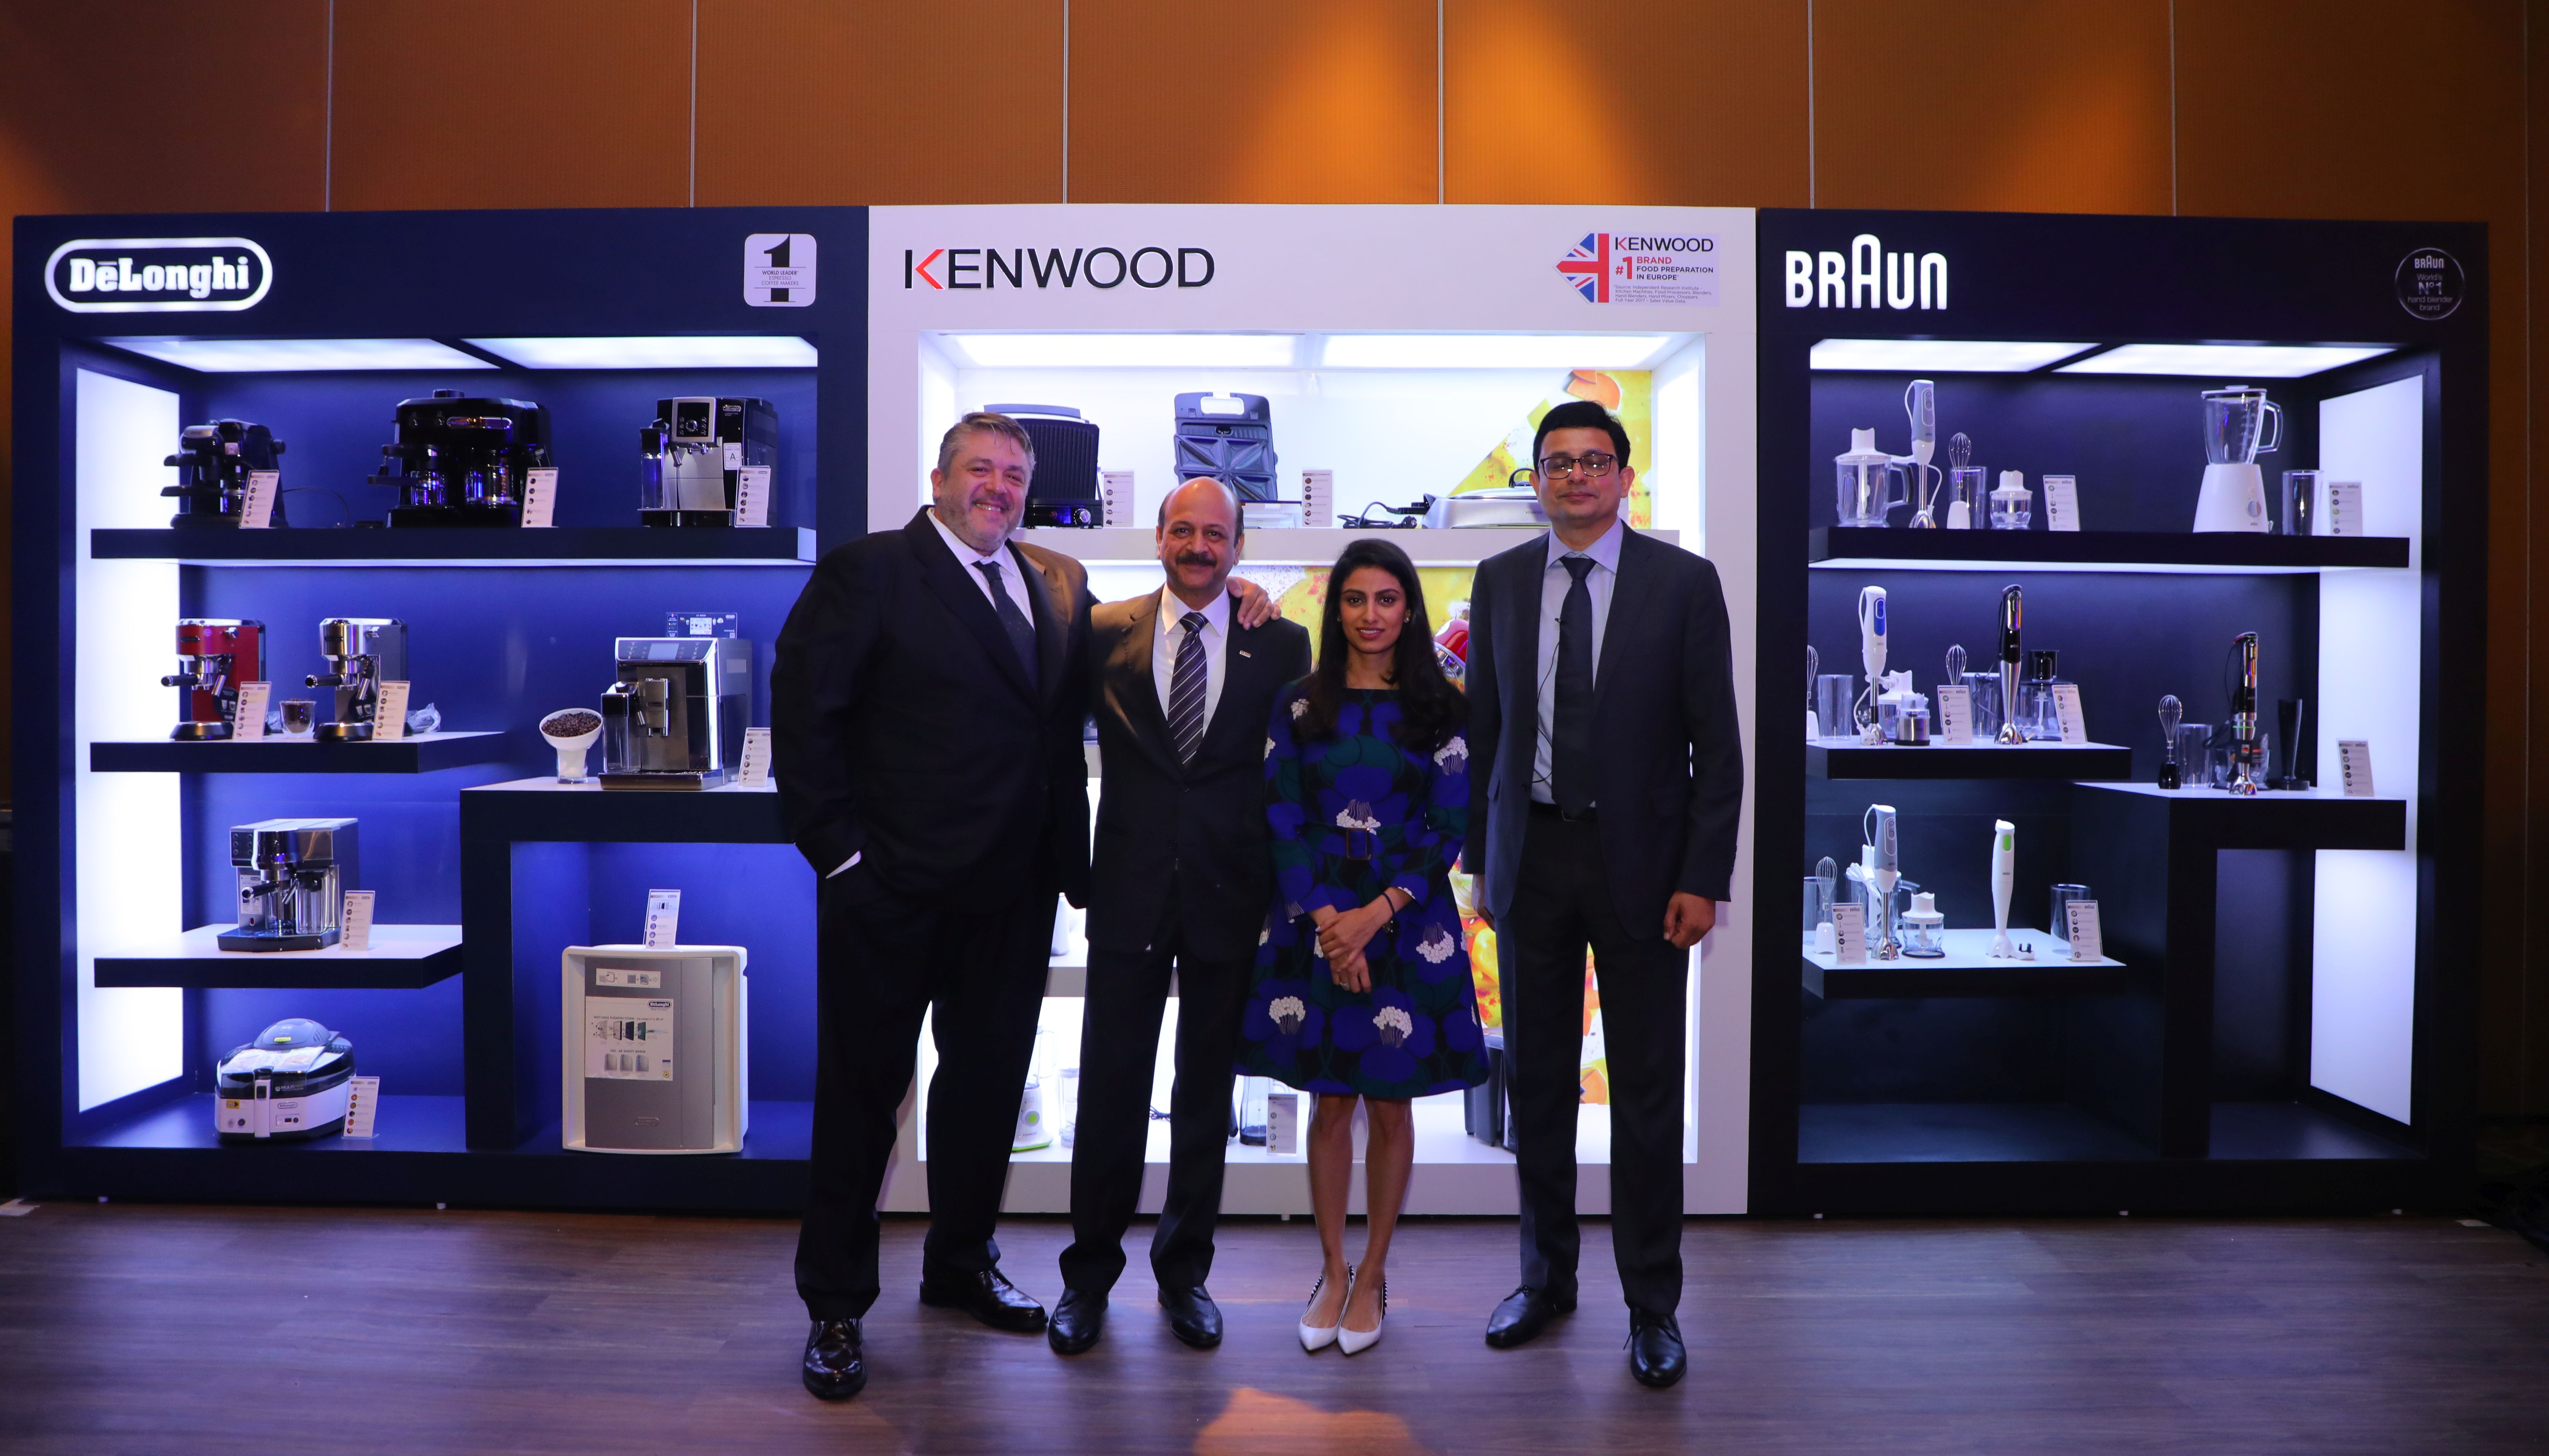  Press Conference – Orient Electric’s strategic partnership with the De’Longhi Group 